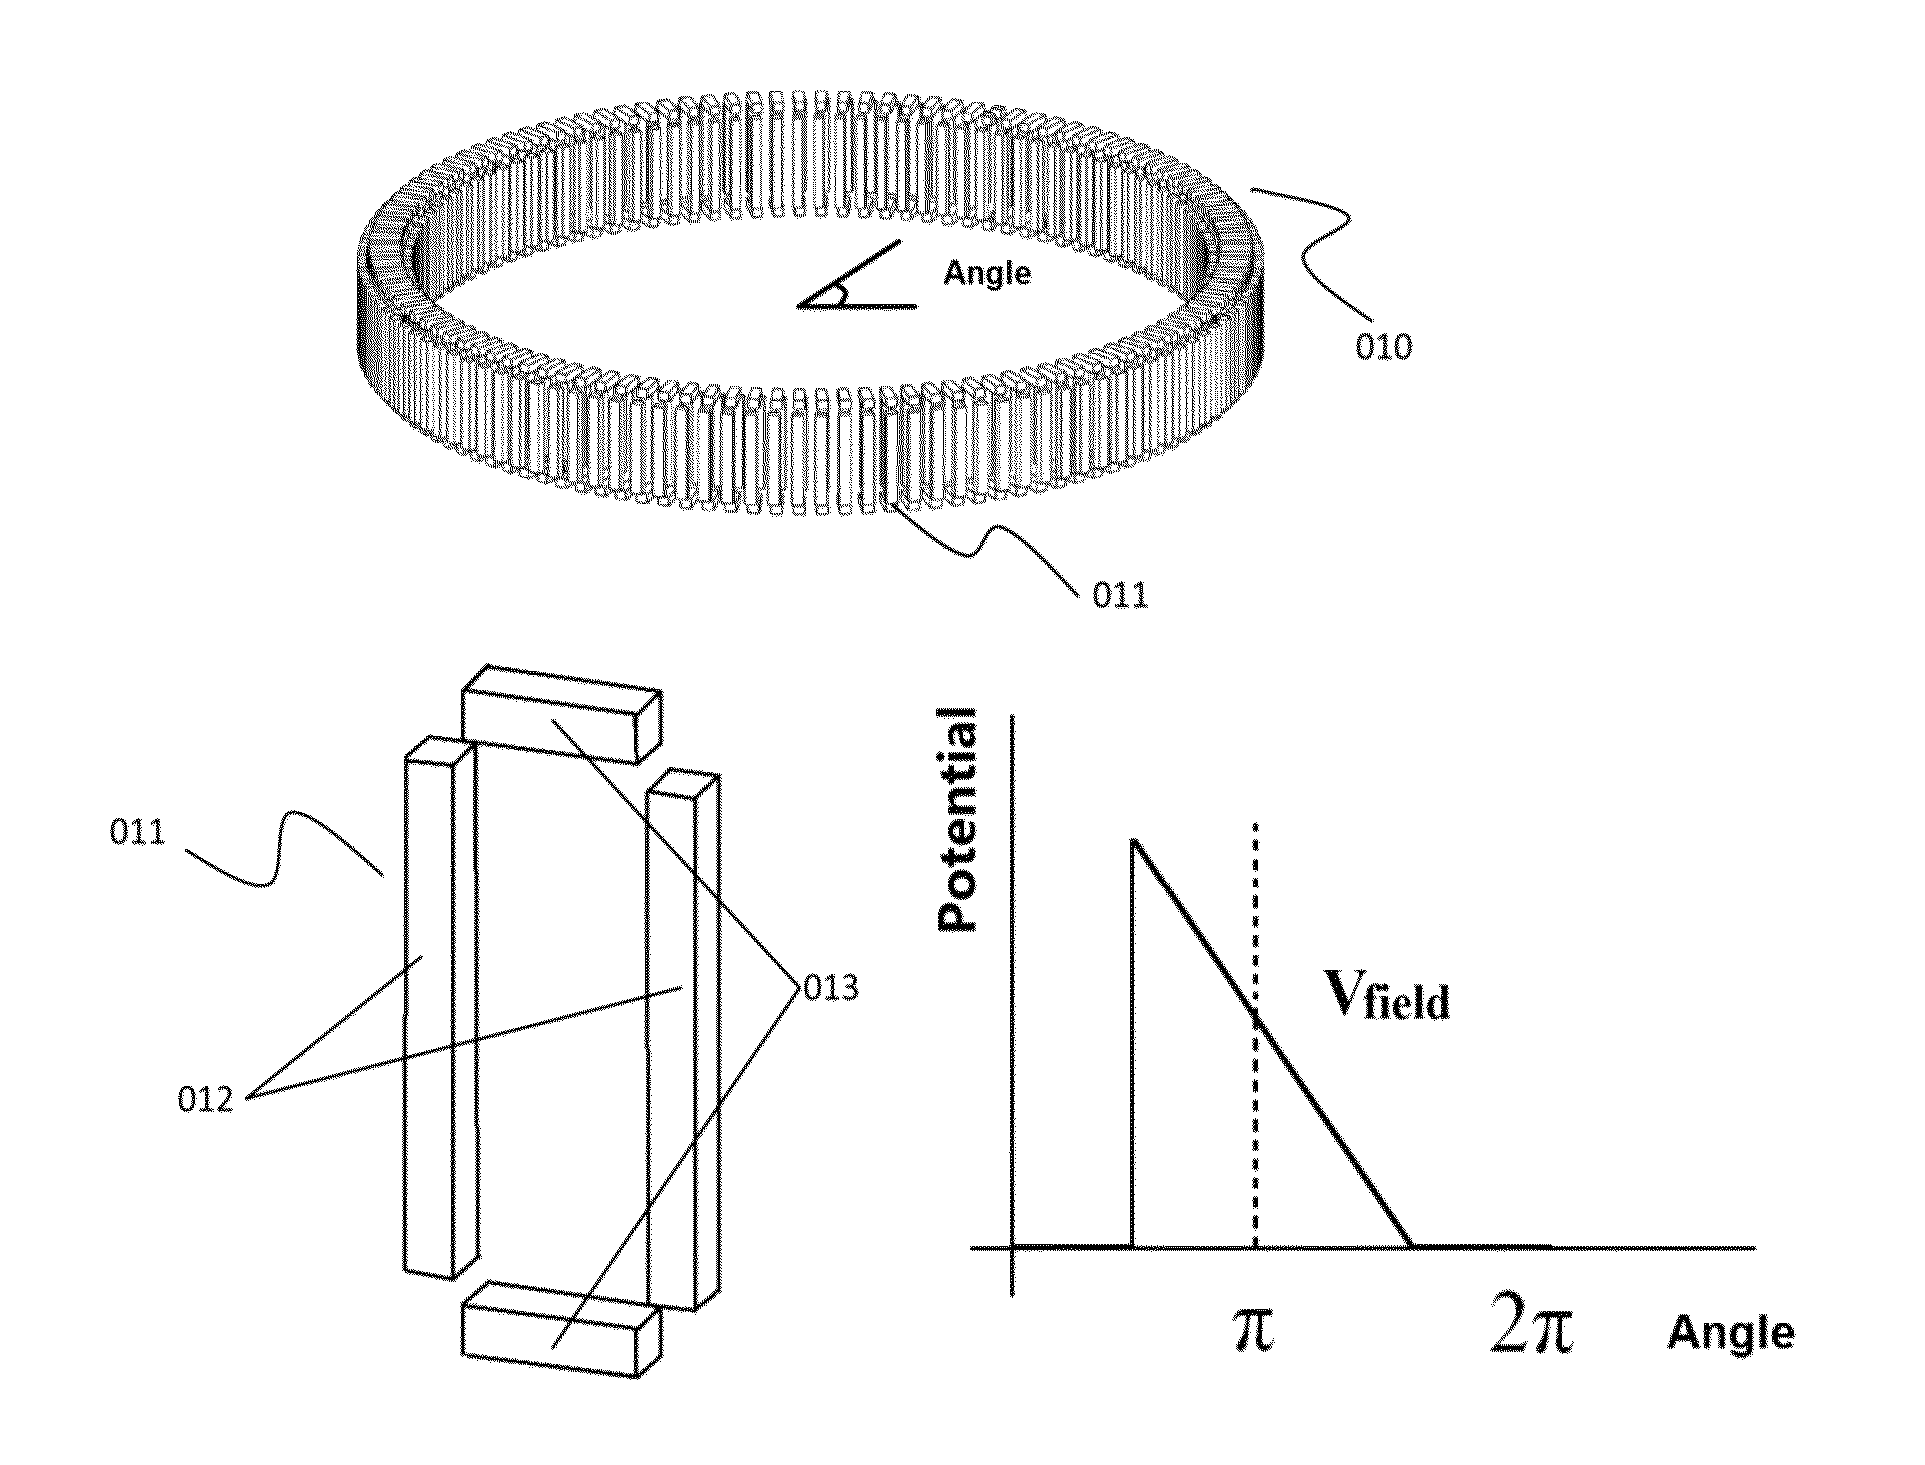 Ion mobility analyzer, combination device thereof, and ion mobility analysis method